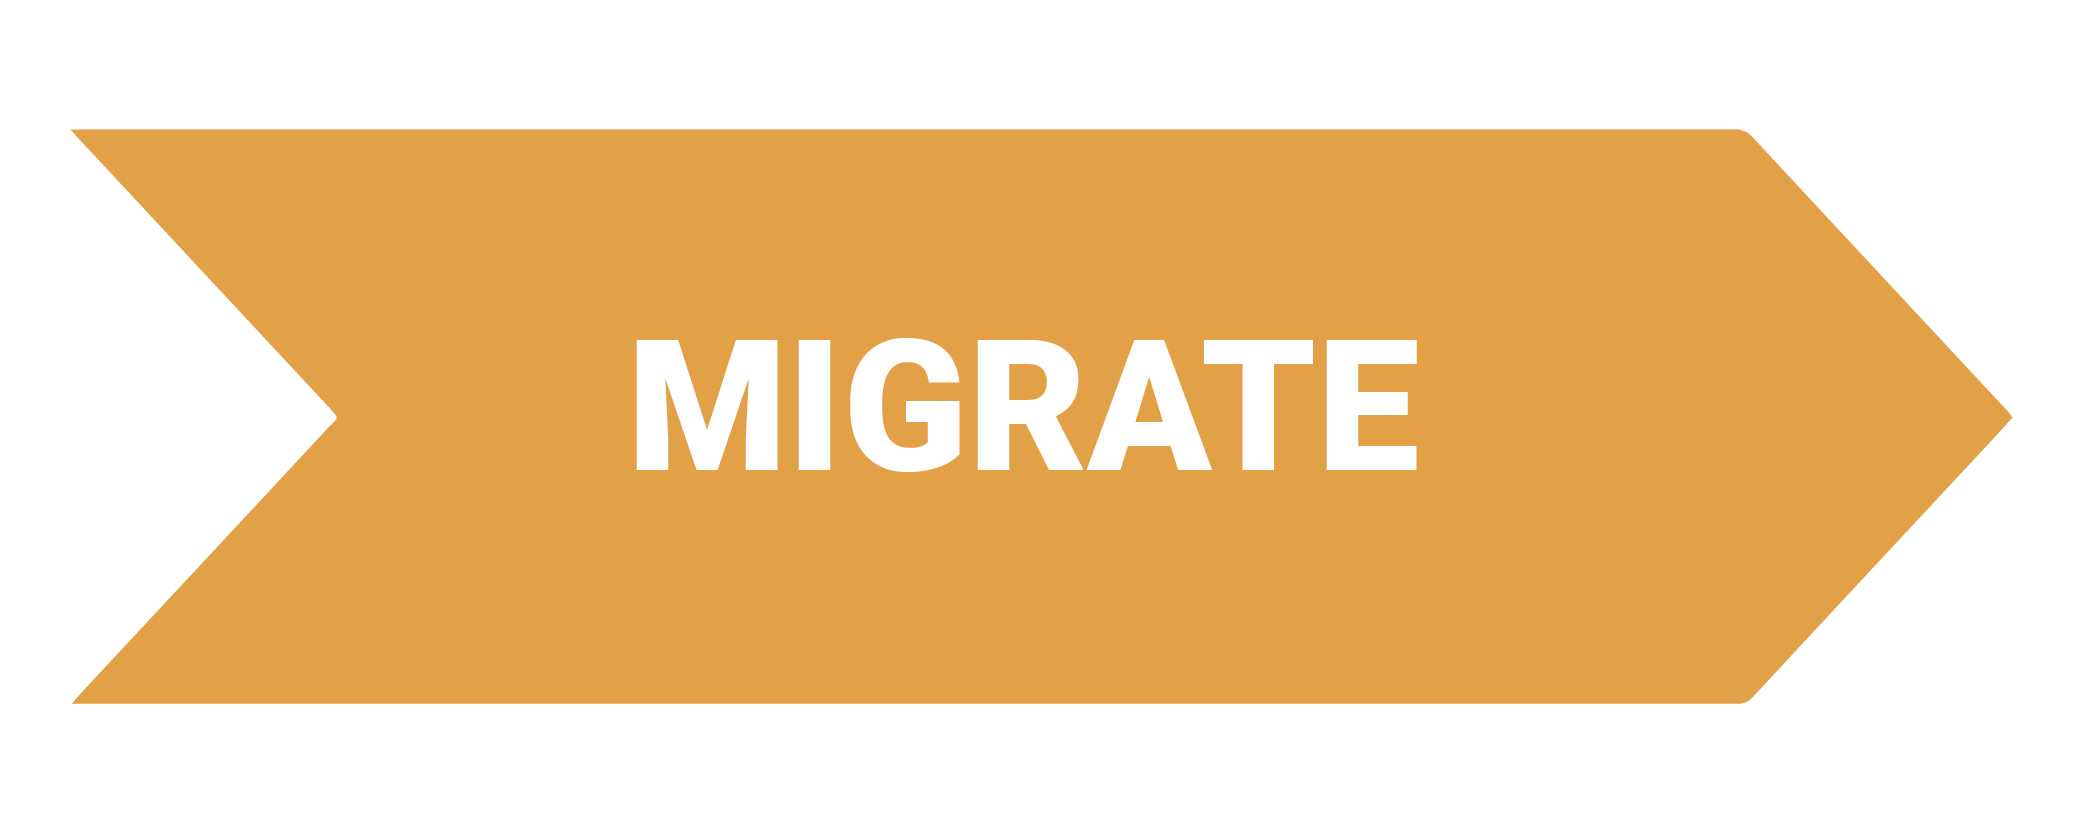 The third step in the migration process is the migrate stage.